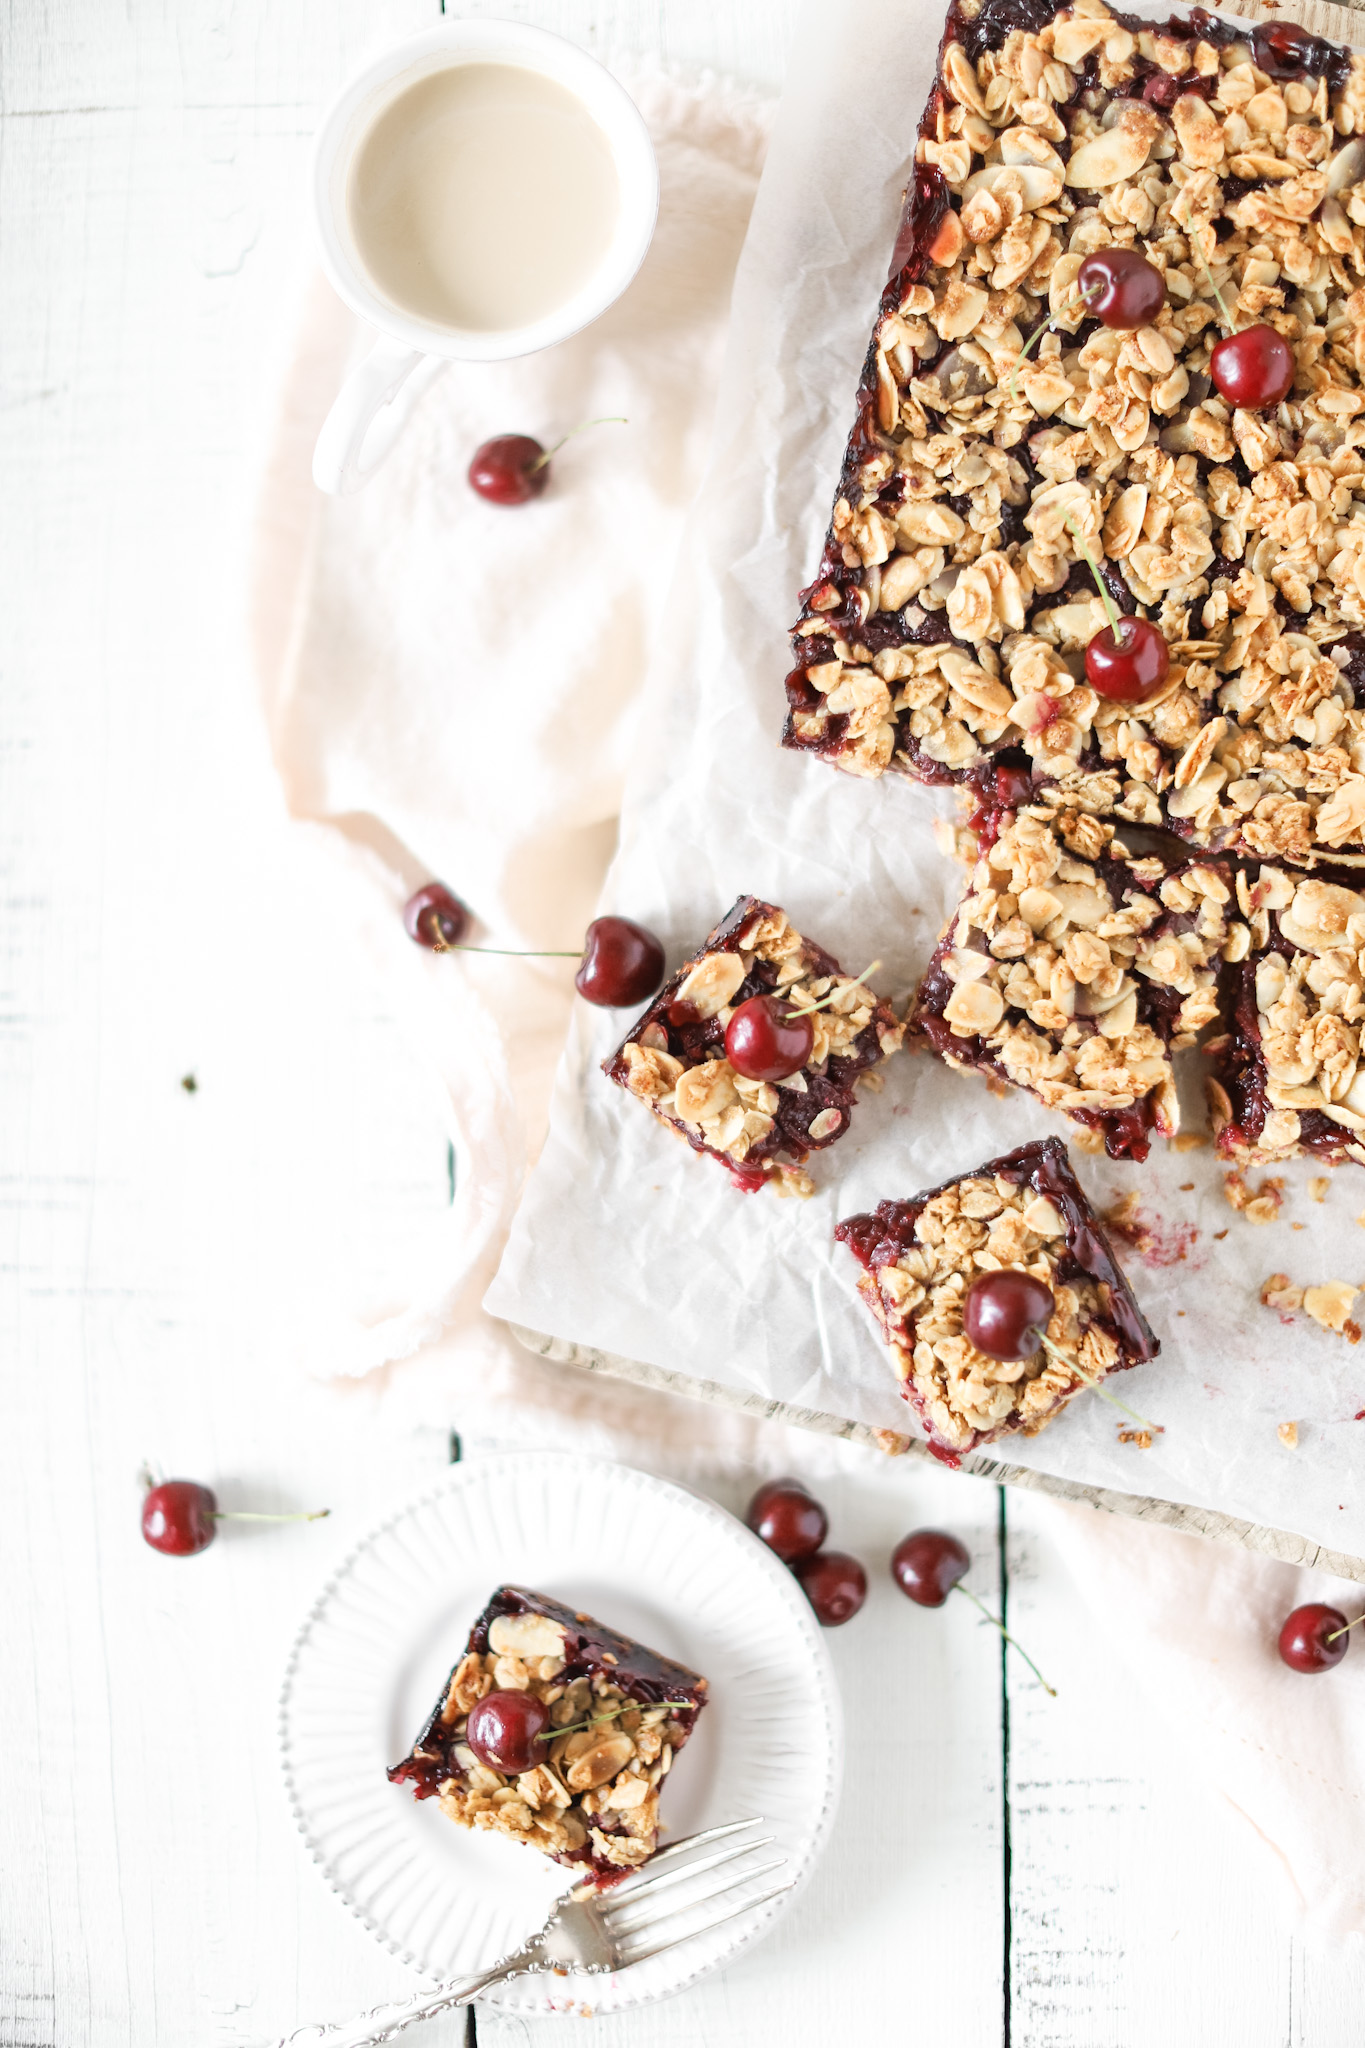 Okanagan Cherry Oat Bars cut into squares on a plate and wooden board and cherries